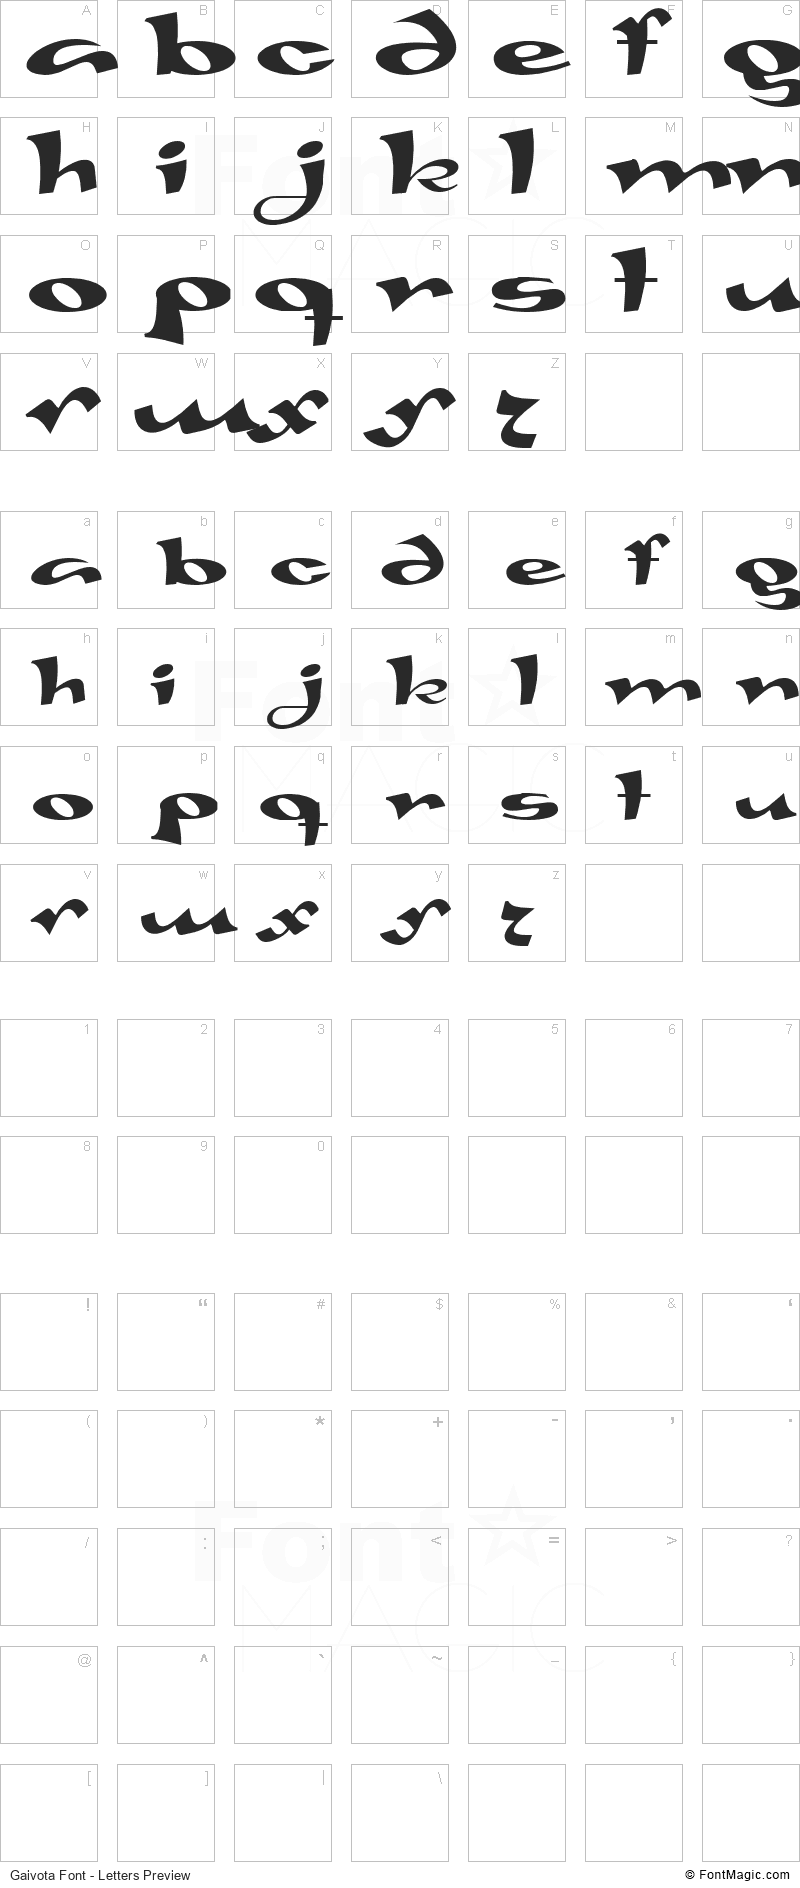 Gaivota Font - All Latters Preview Chart